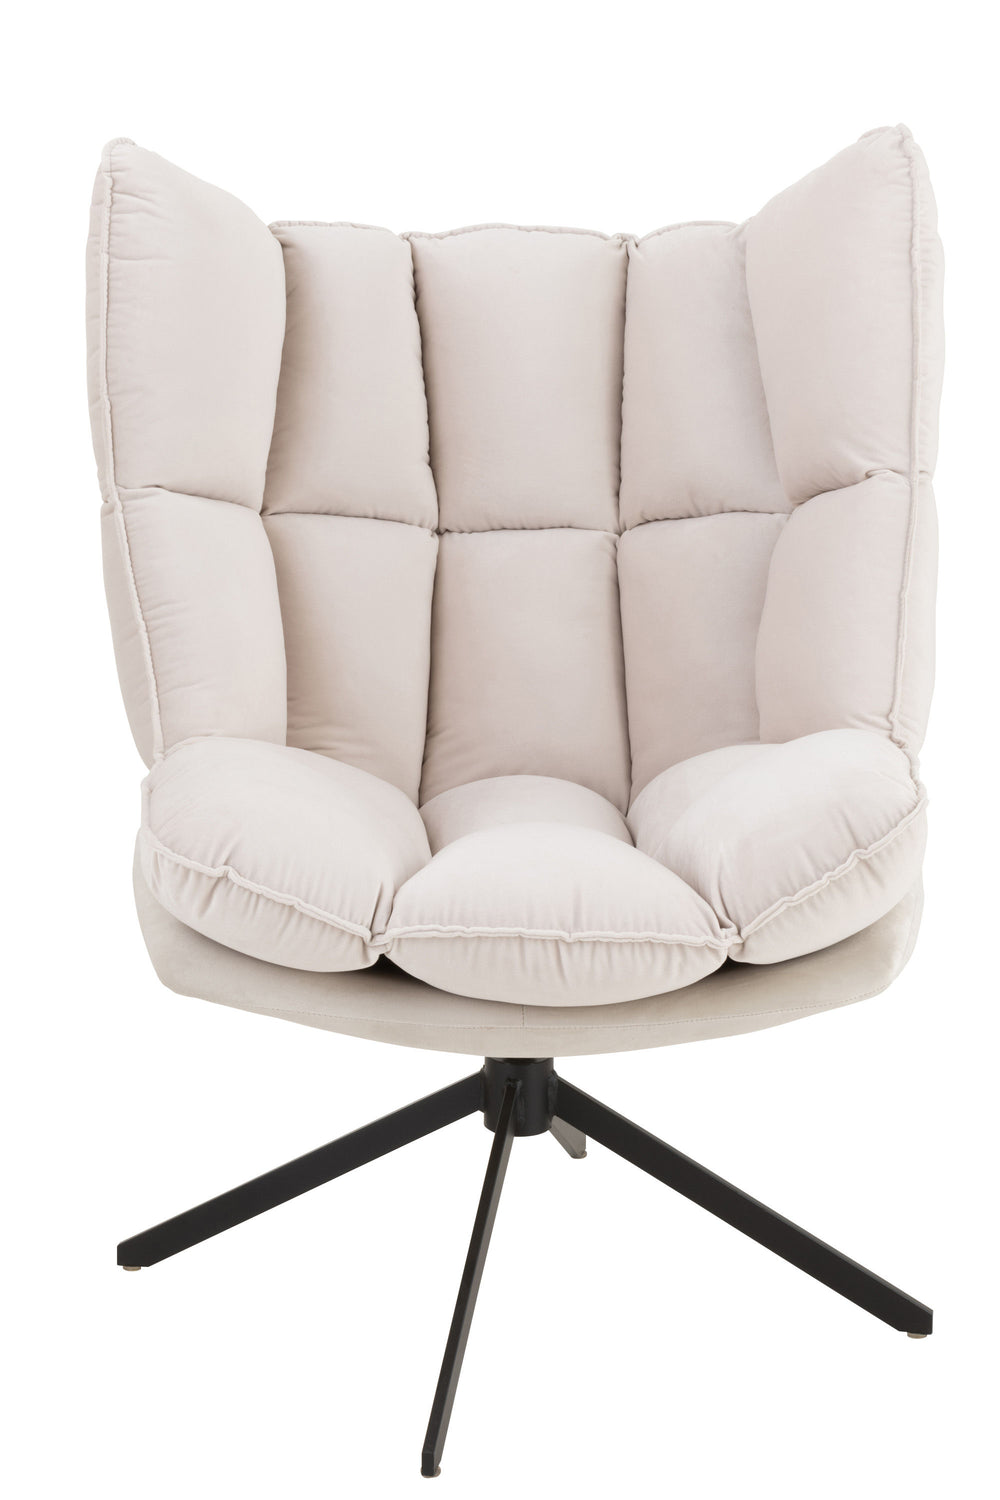 J-Line by Jolipa CHAIR RELAX CUSHION ON FRAME TEXTILE/METAL BEIGE